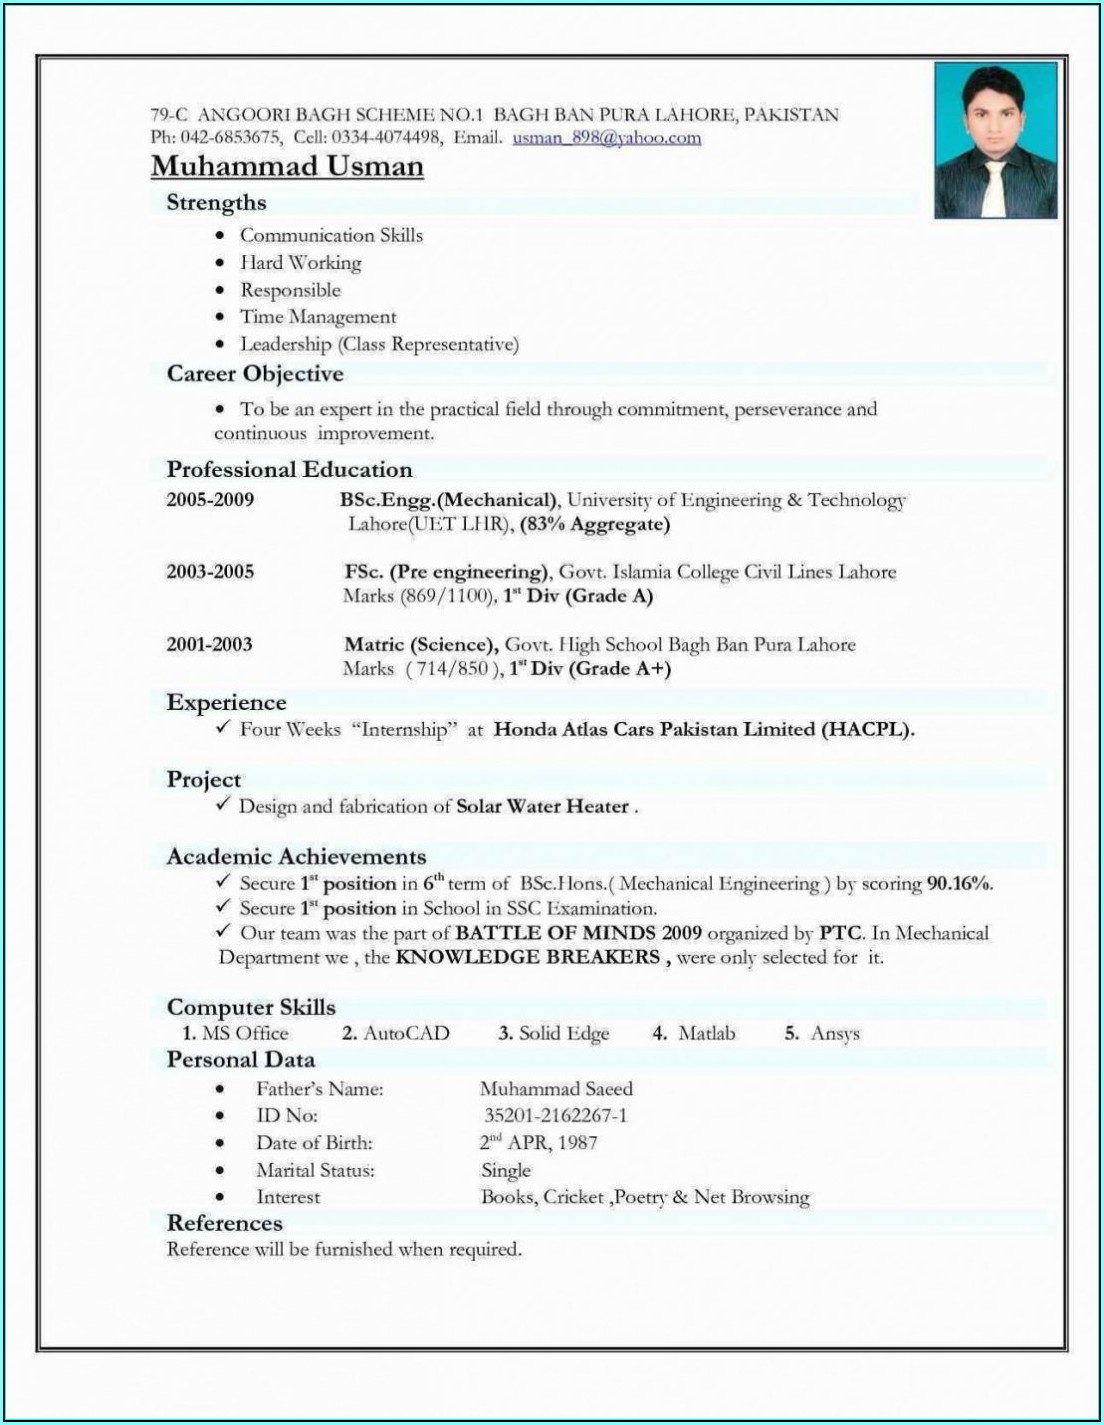 Resume Format Download In Ms Word For Fresher Mechanical Engineer